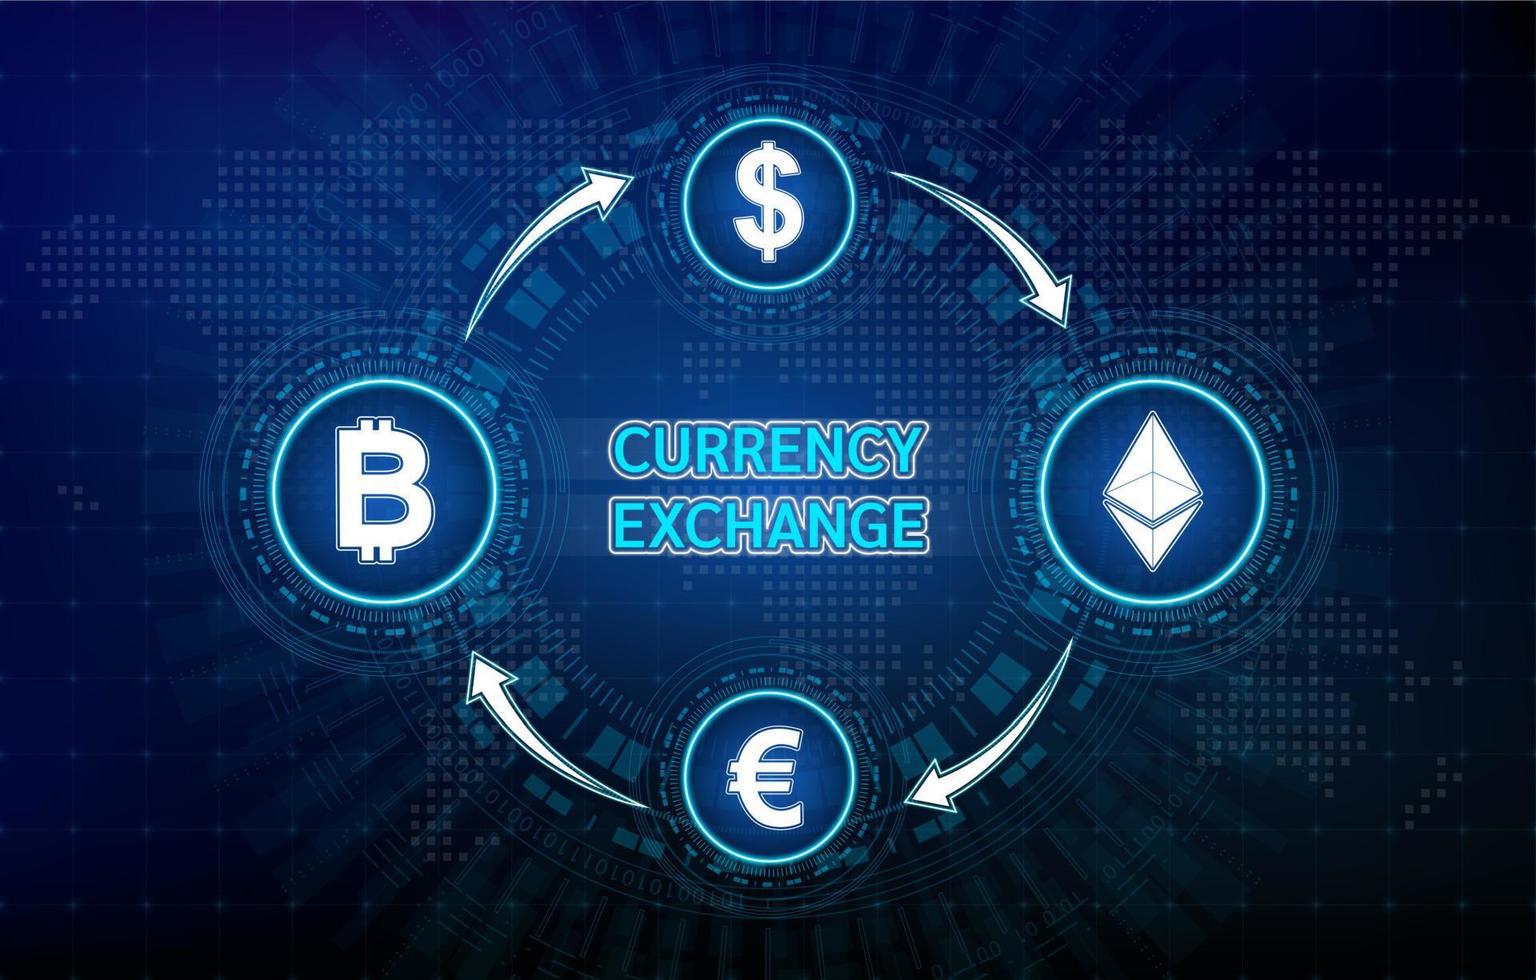 Currency exchange dollar, euro and bitcoin, ethereum. Token cryptocurrency. Money transfer on stock exchange international trading. Digital online technology blockchain stock market. Vector EPS10.